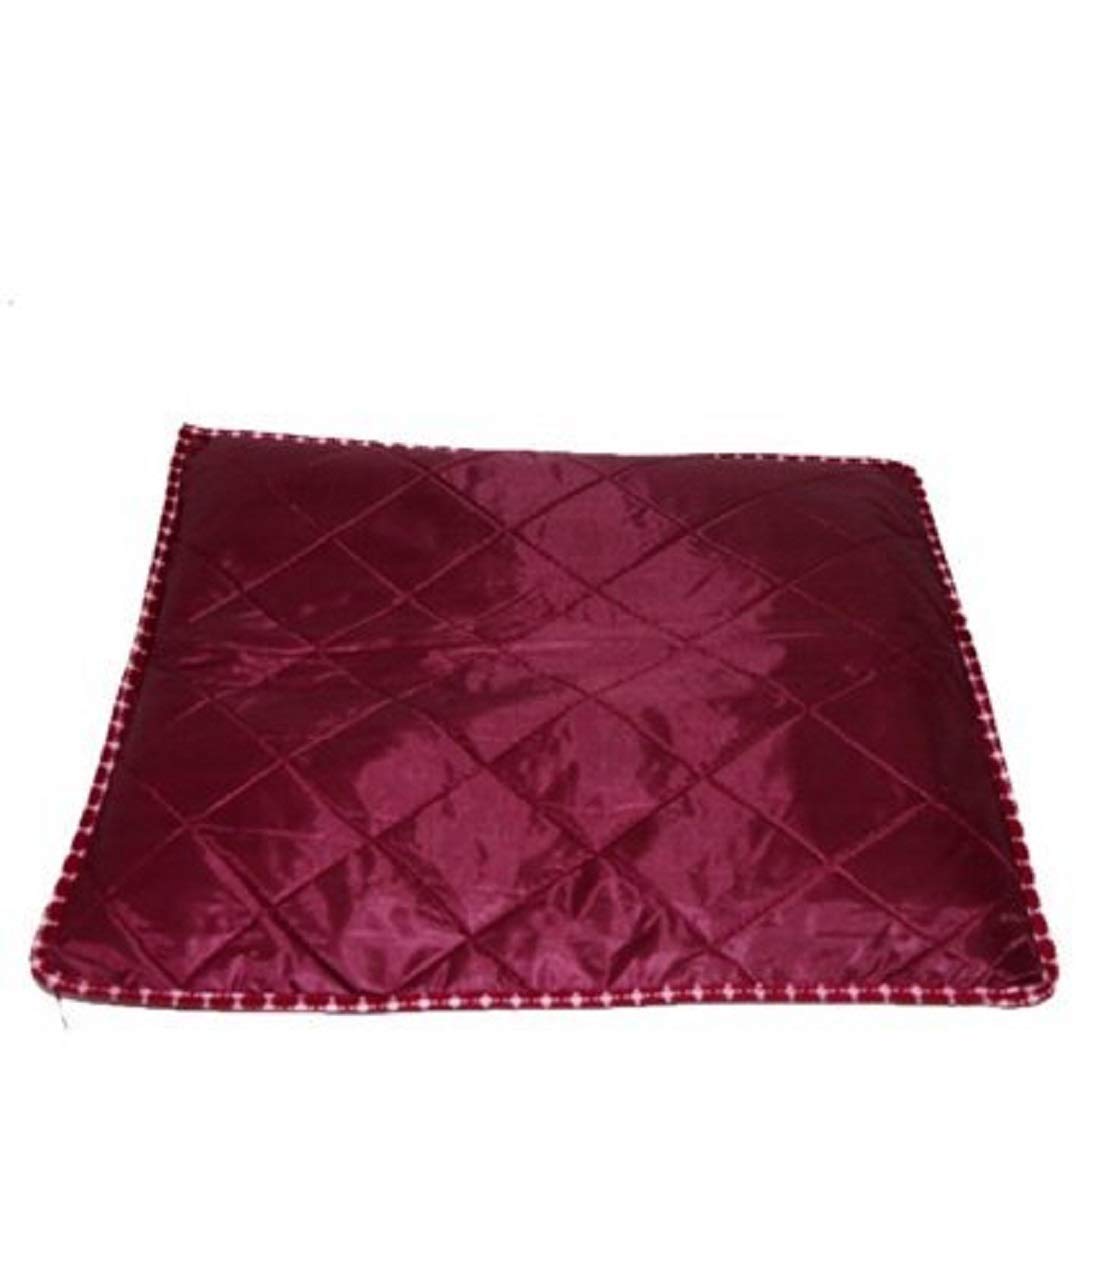 Fabric Resin Saree Covers With Zip|Saree Covers For Storage|Saree Packing Covers For Wedding|Pack Of 6 (Maroon)